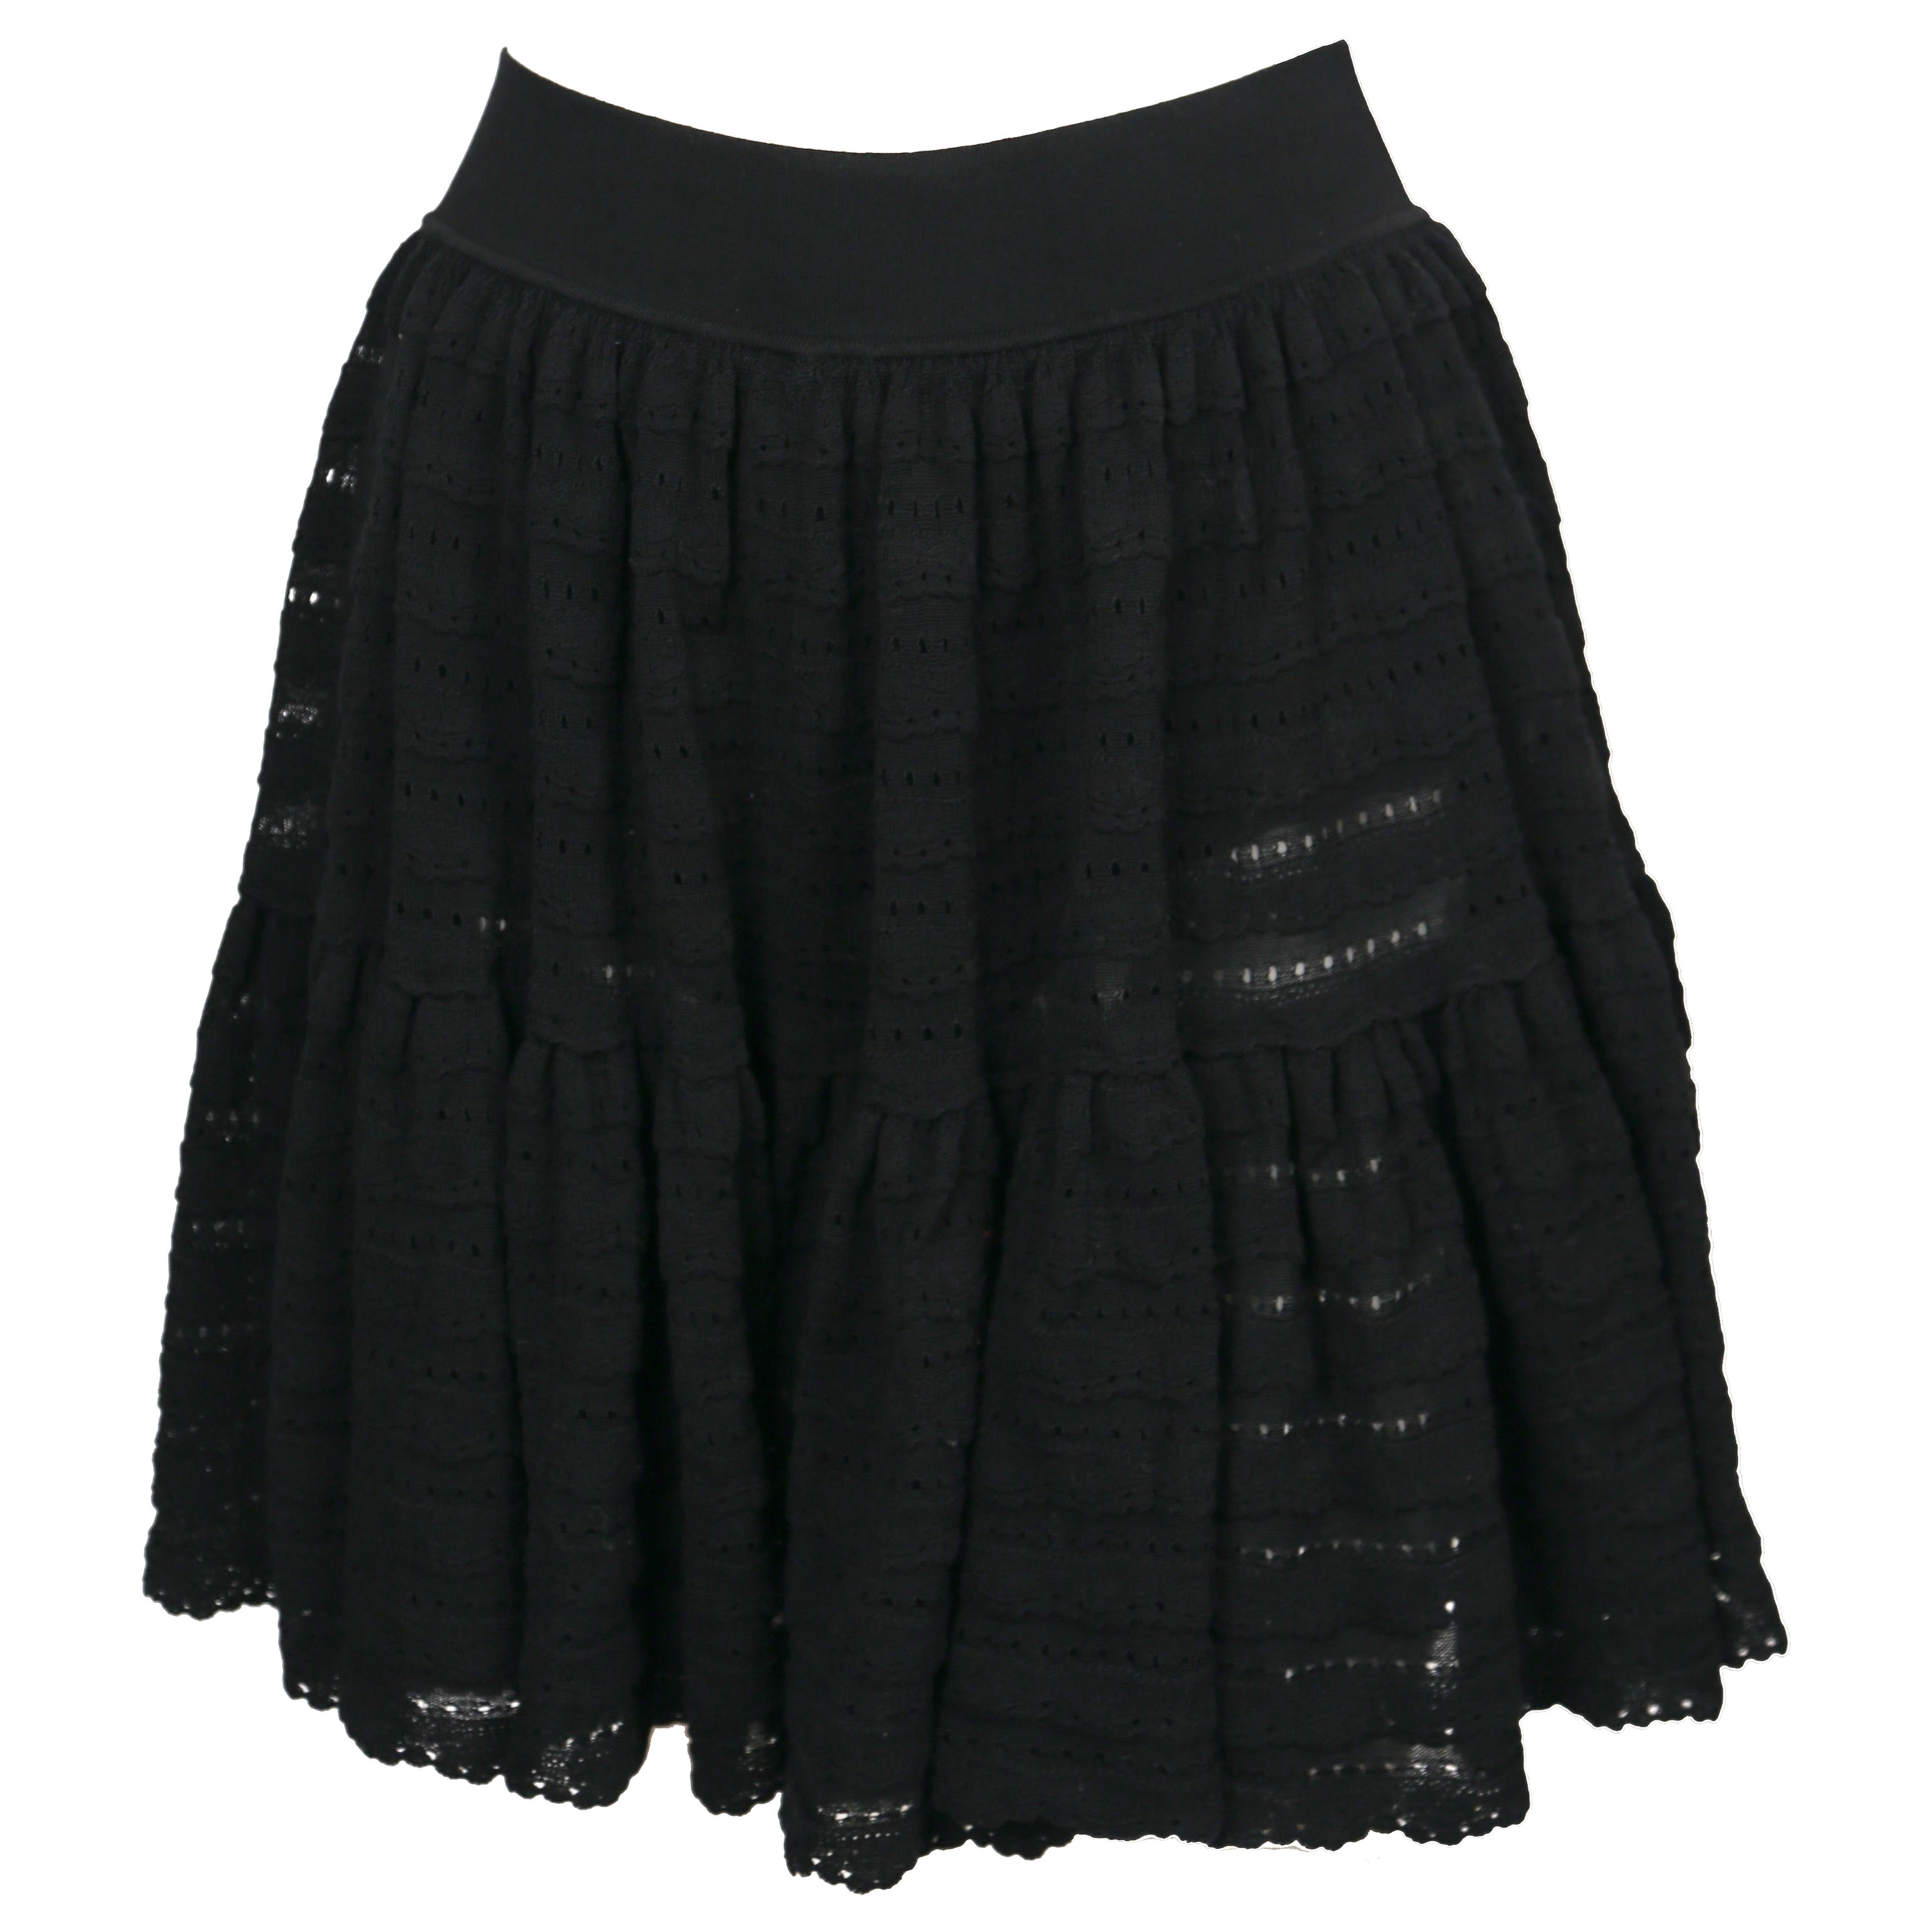 2000's AZZEDINE ALAIA black pointelle knit skirt with ruffles & hidden shorts For Sale